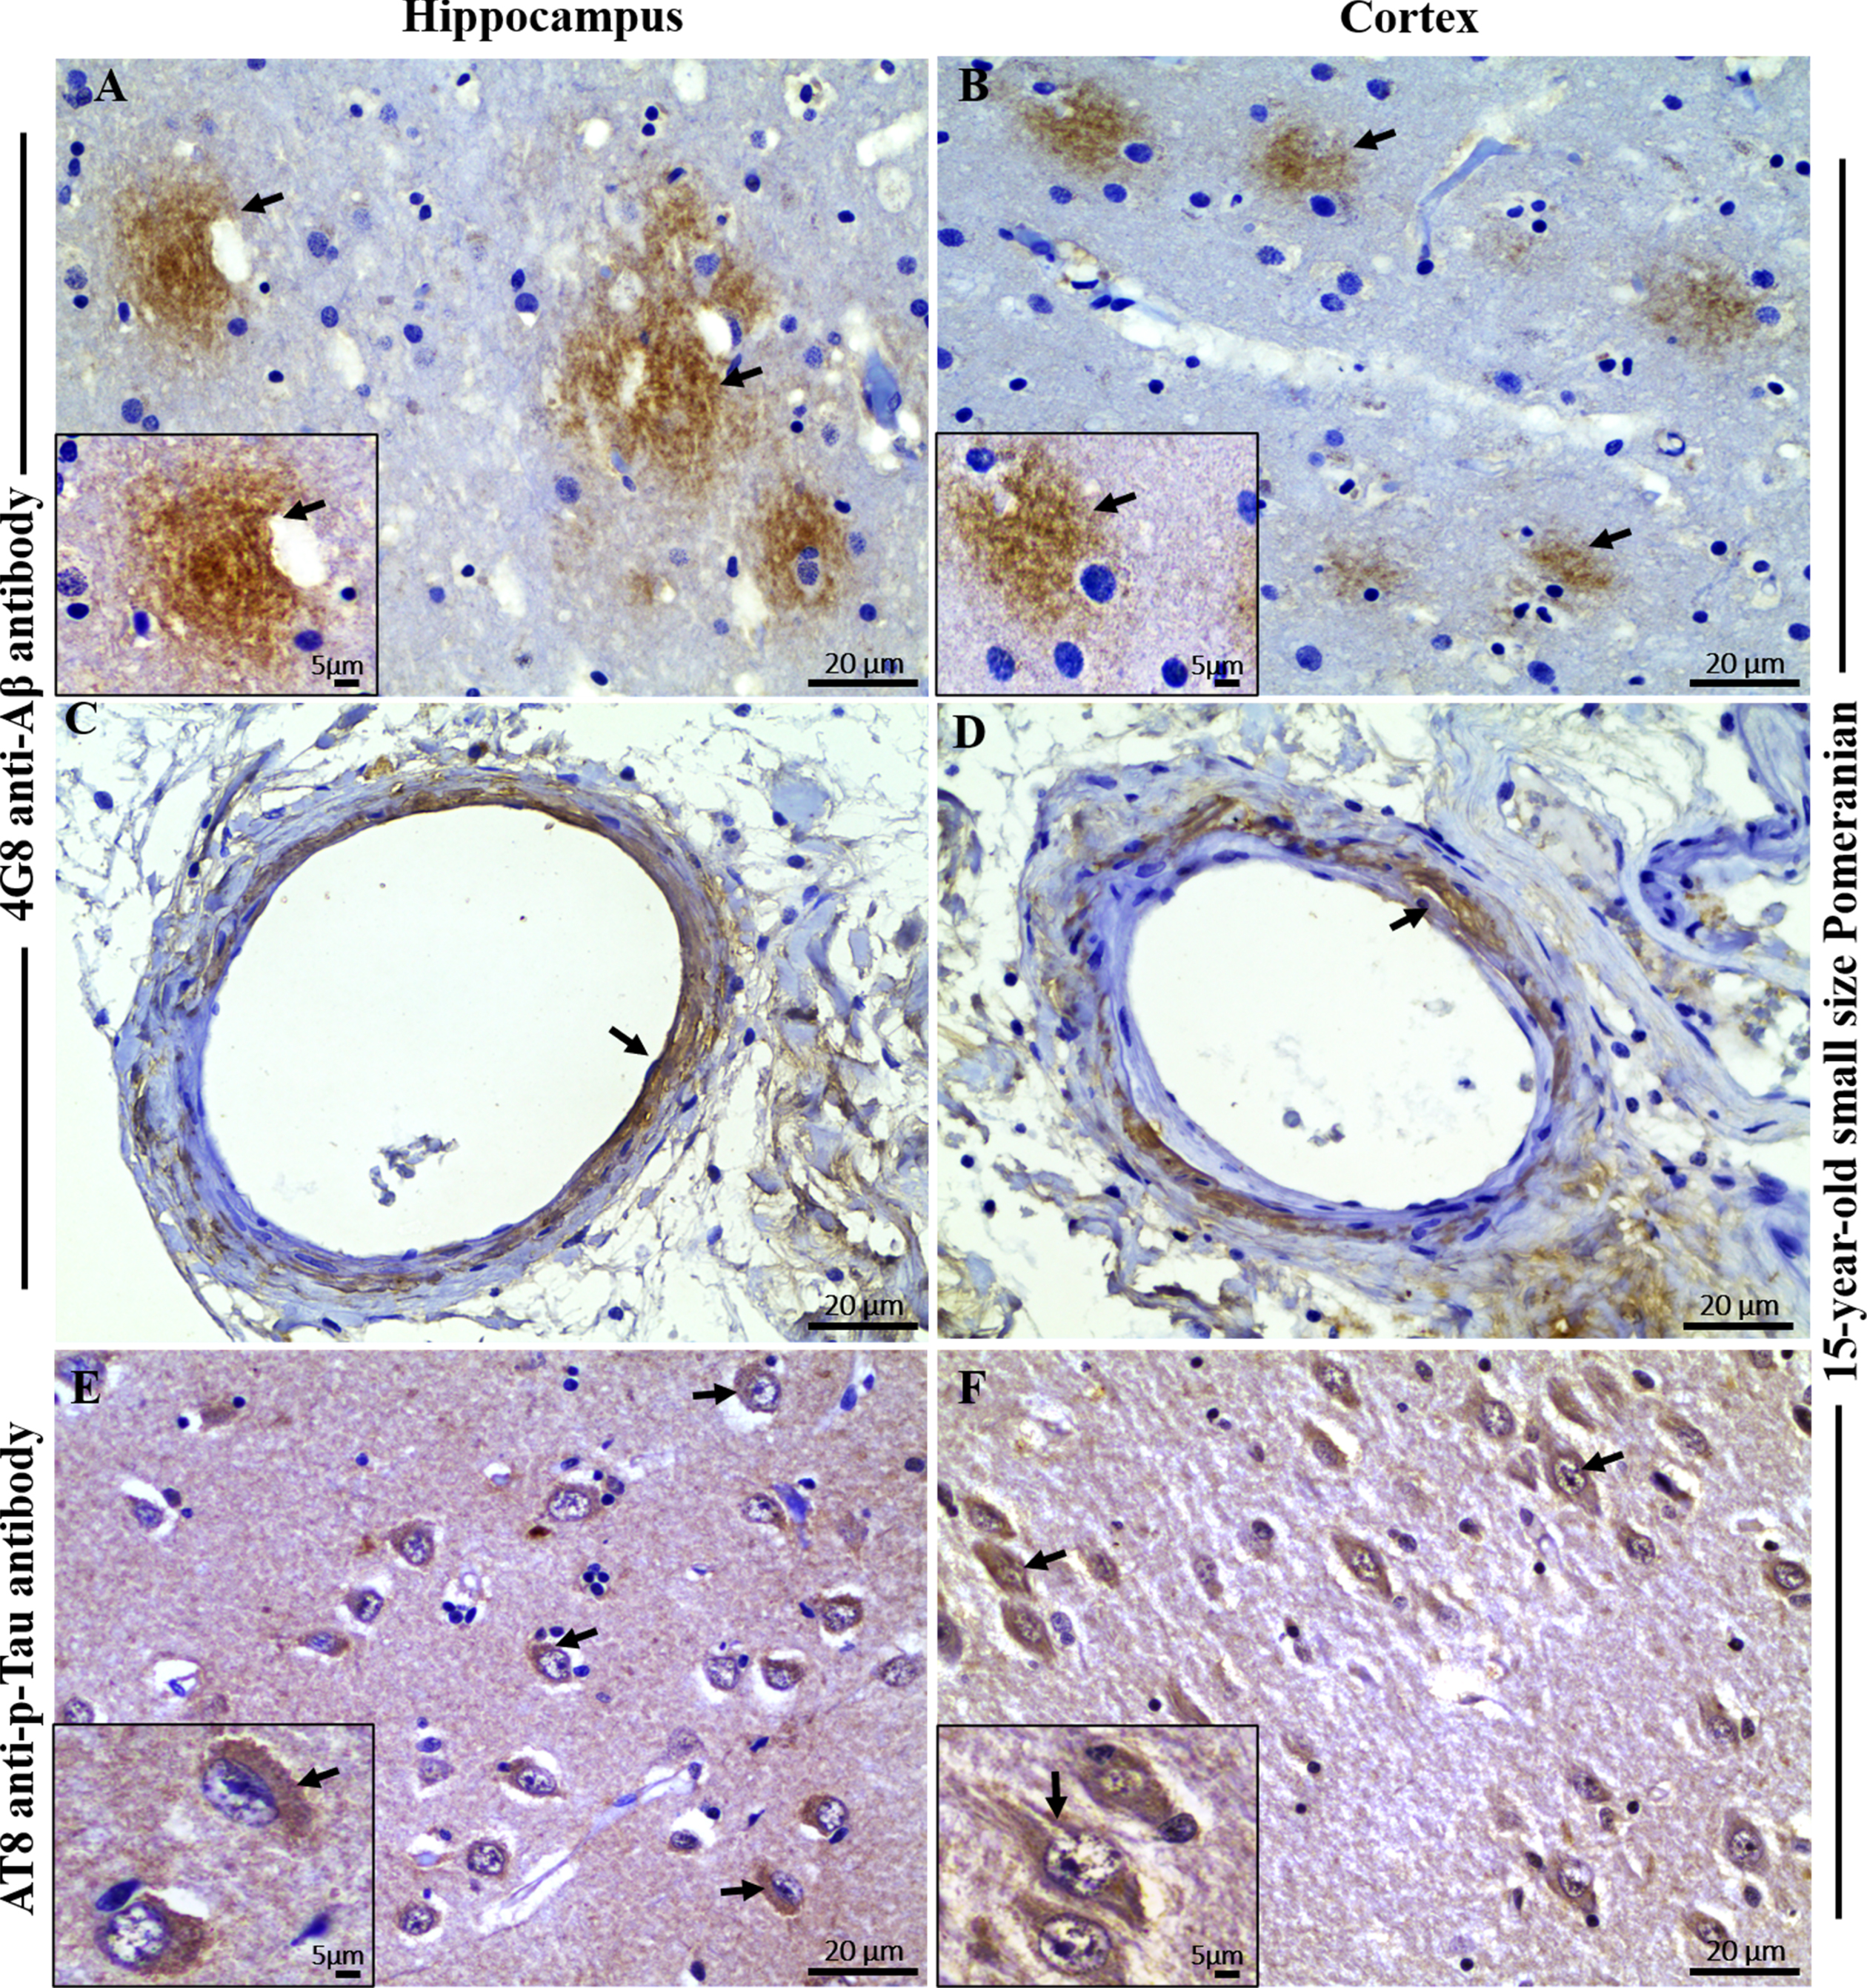 Immunohistochemical staining with 4G8 anti-Aβ and AT8 anti-pTau antibody in the brain hippocampal and cortical region of an aged dog. Immunohistochemical staining showed extensive extracellular Aβ plaques in the A) hippocampus and B) frontal cortex (black arrows) of a 15-year-old small size Pomeranian. Staining of vascular amyloid (cerebral amyloid angiopathy) was prominent in the C) hippocampus and D) frontal cortex of a 15-year-old small size Pomeranian respectively (black arrows). Immunohistochemical staining showed extensive intracellular hyperphosphorylated tau (p-Tau) staining in the E) hippocampus and F) frontal cortex respectively (black arrows) of a 15-year-old small size Pomeranian. Representative of all aged dogs. Scale bar = 20μm and inserts scale bar = 5μm.